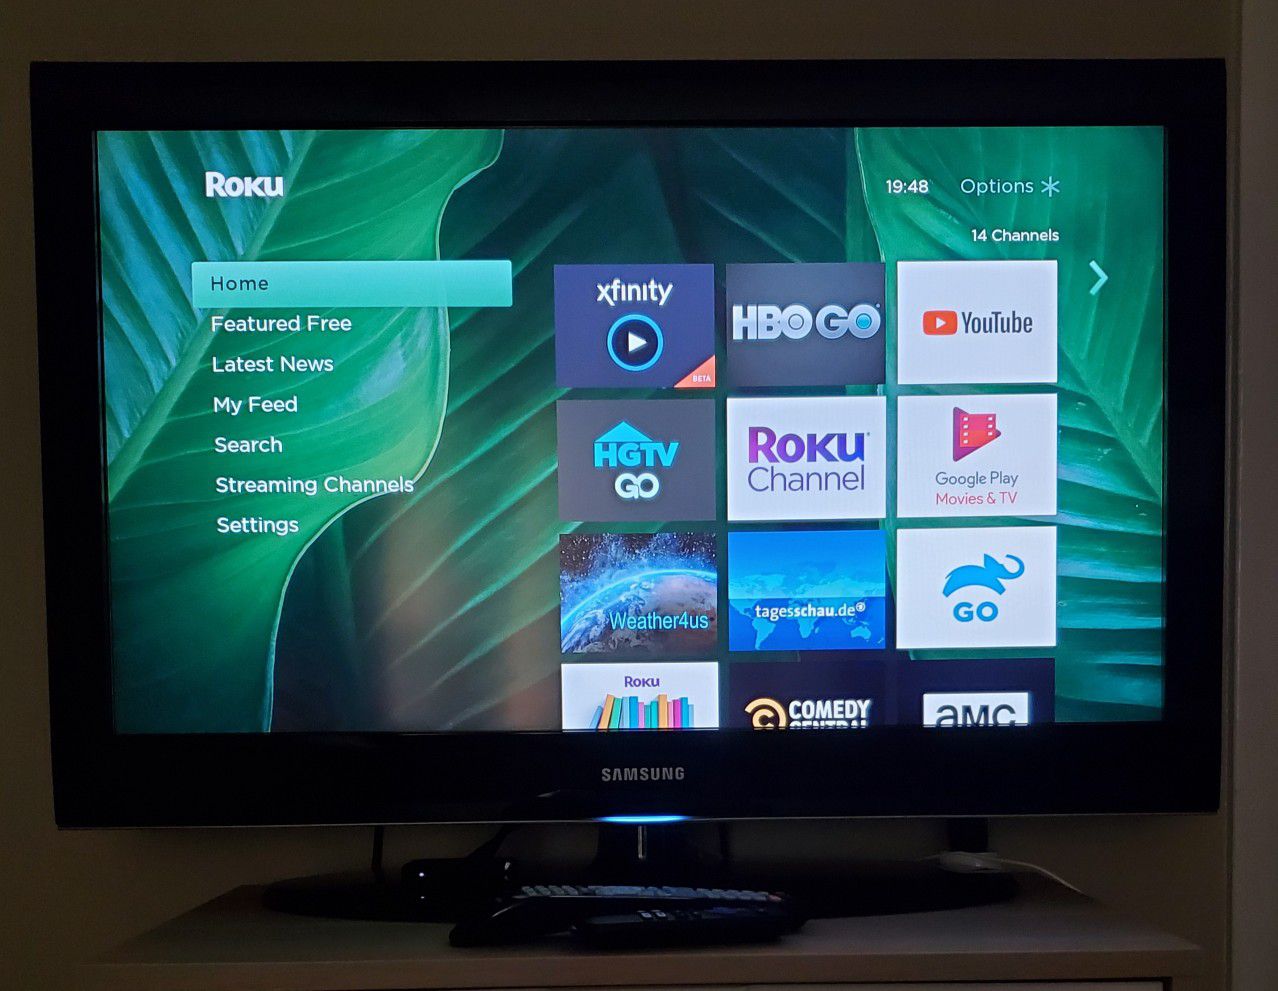 Samsung TV 37 inches with Roku